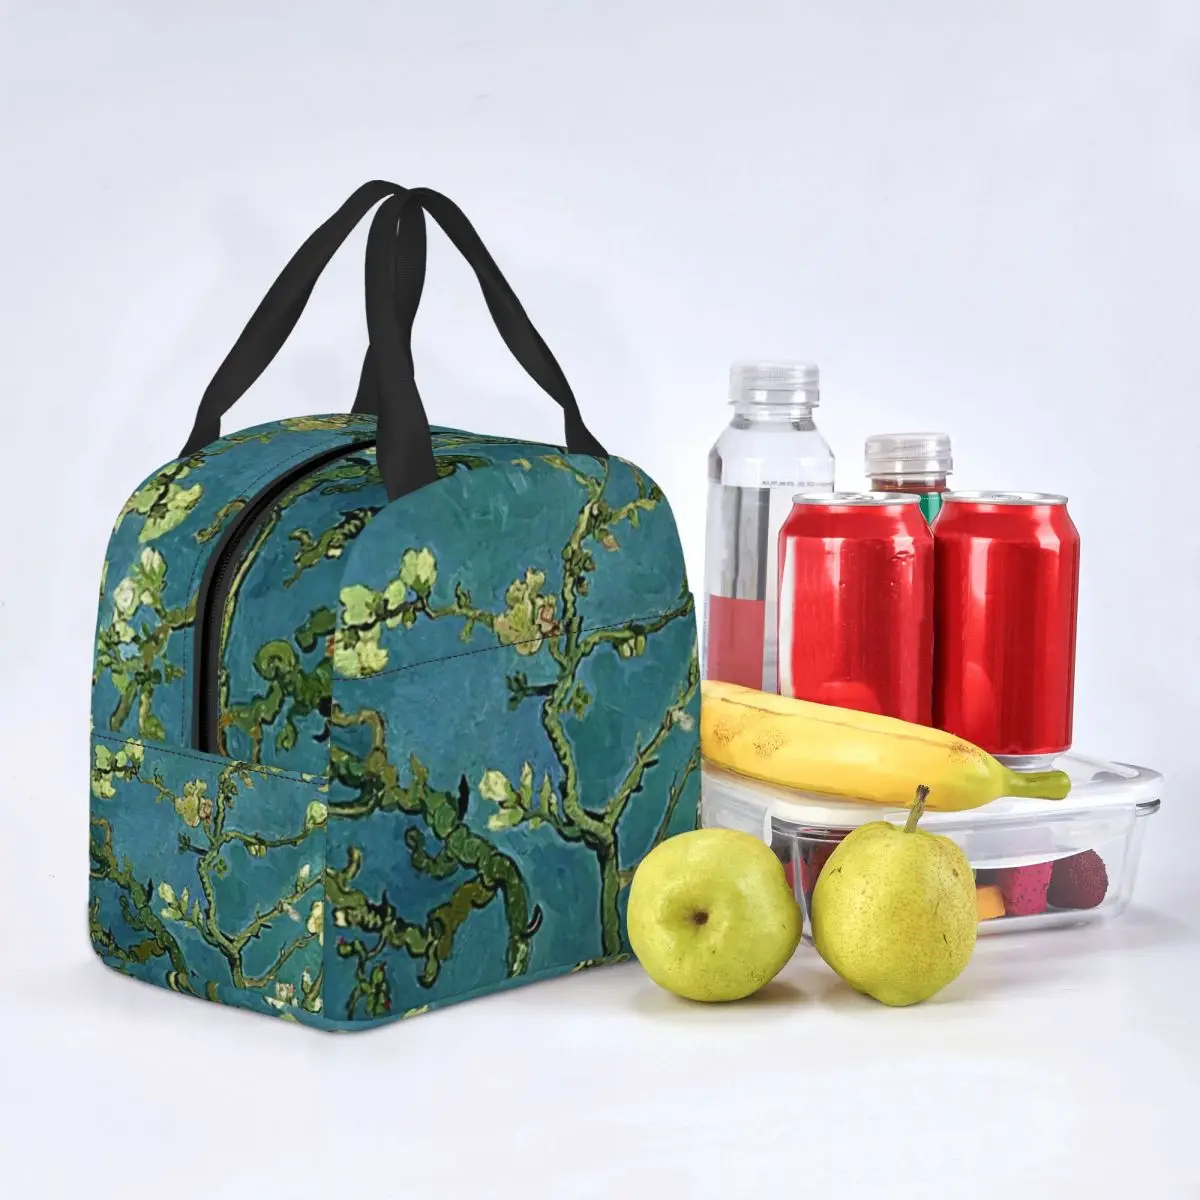 

Floral Print Art Lunch Bag with Handle Van Gogh Almond Blossoms Meal Cooler Bag Fancy Carry Beach Thermal Bag